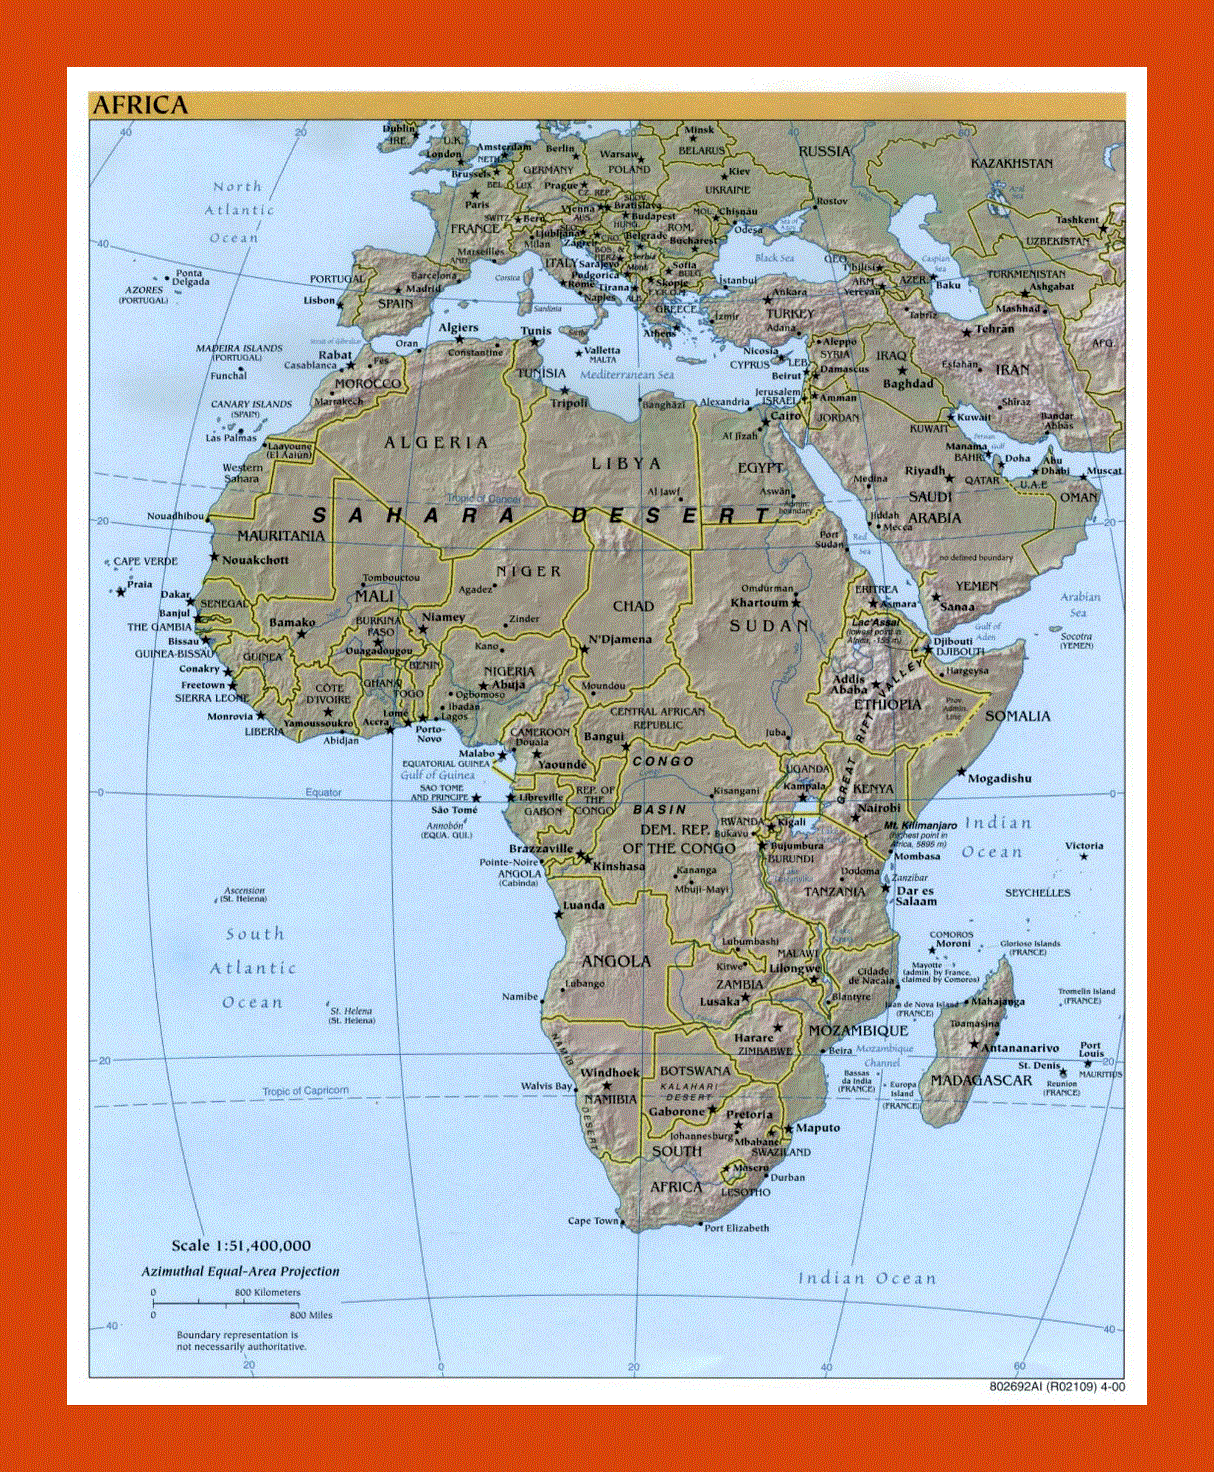 Political map of Africa - 2000